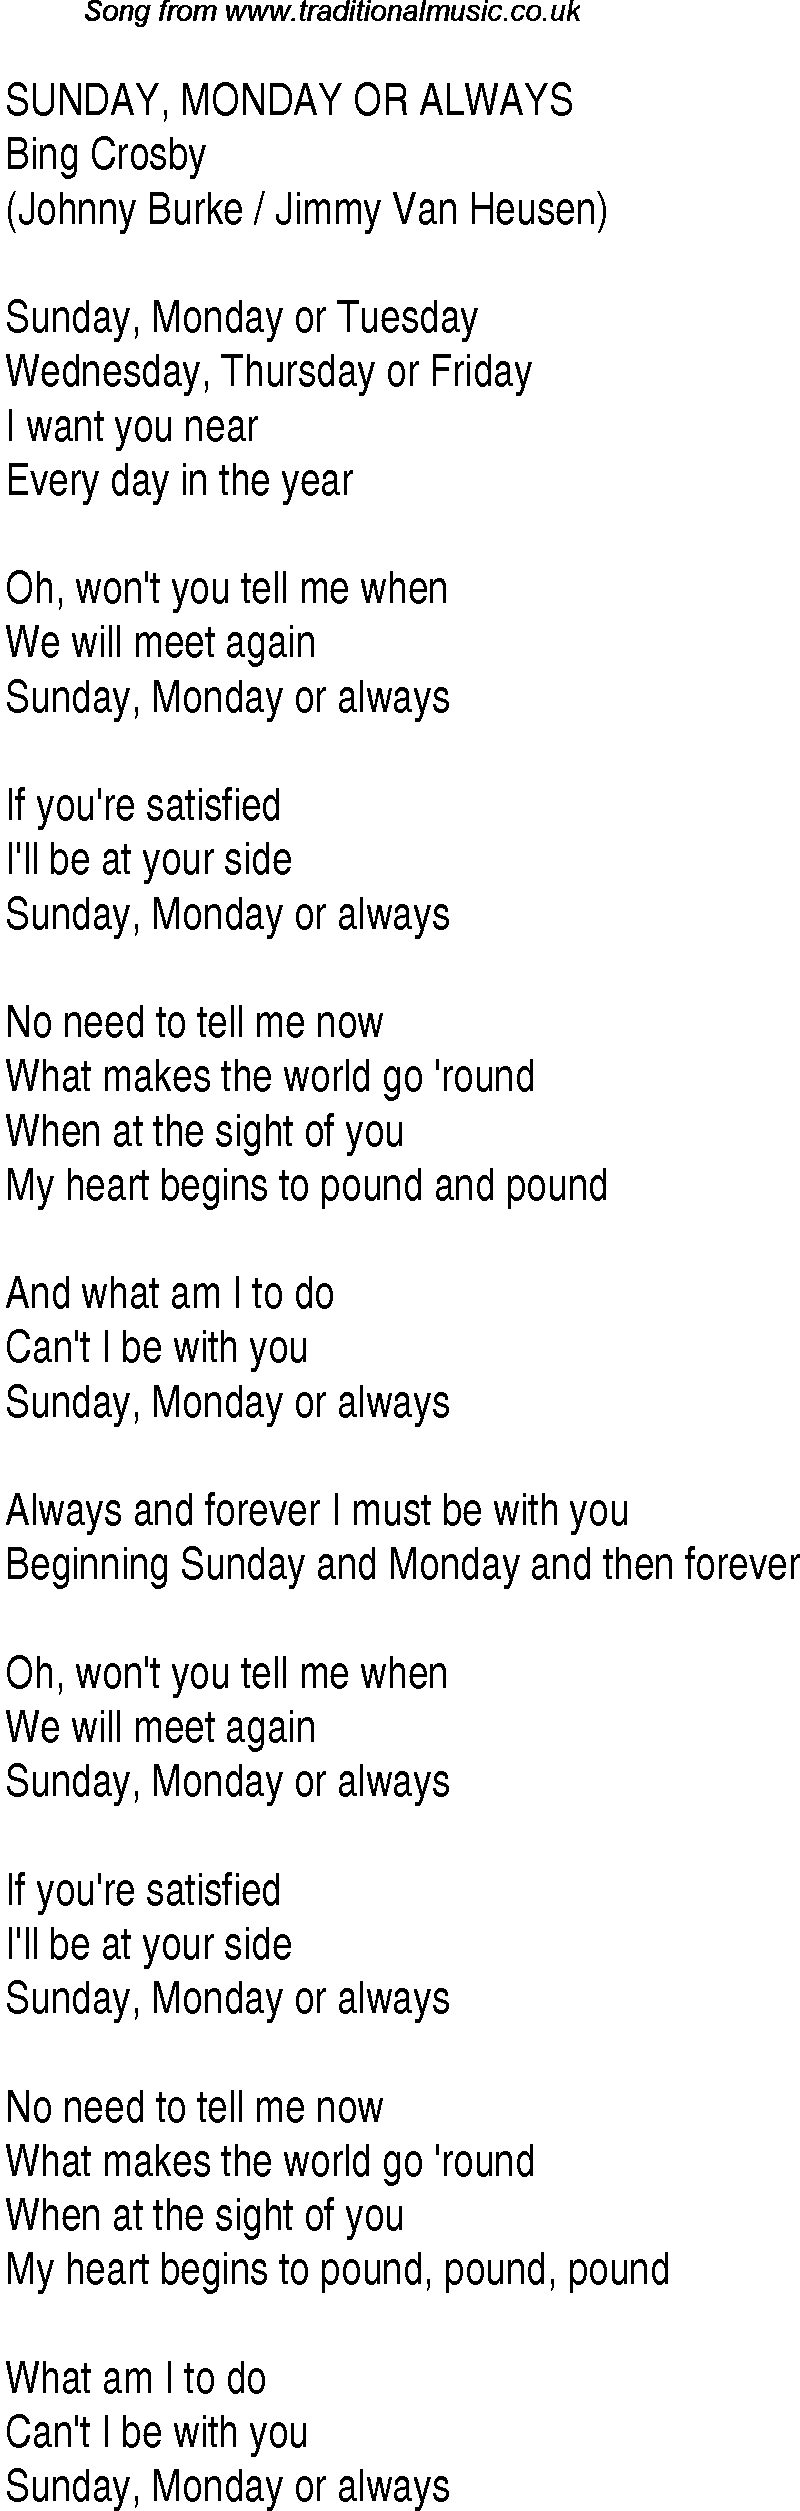 Music charts top songs 1943 - lyrics for Sunday Monday Or Always